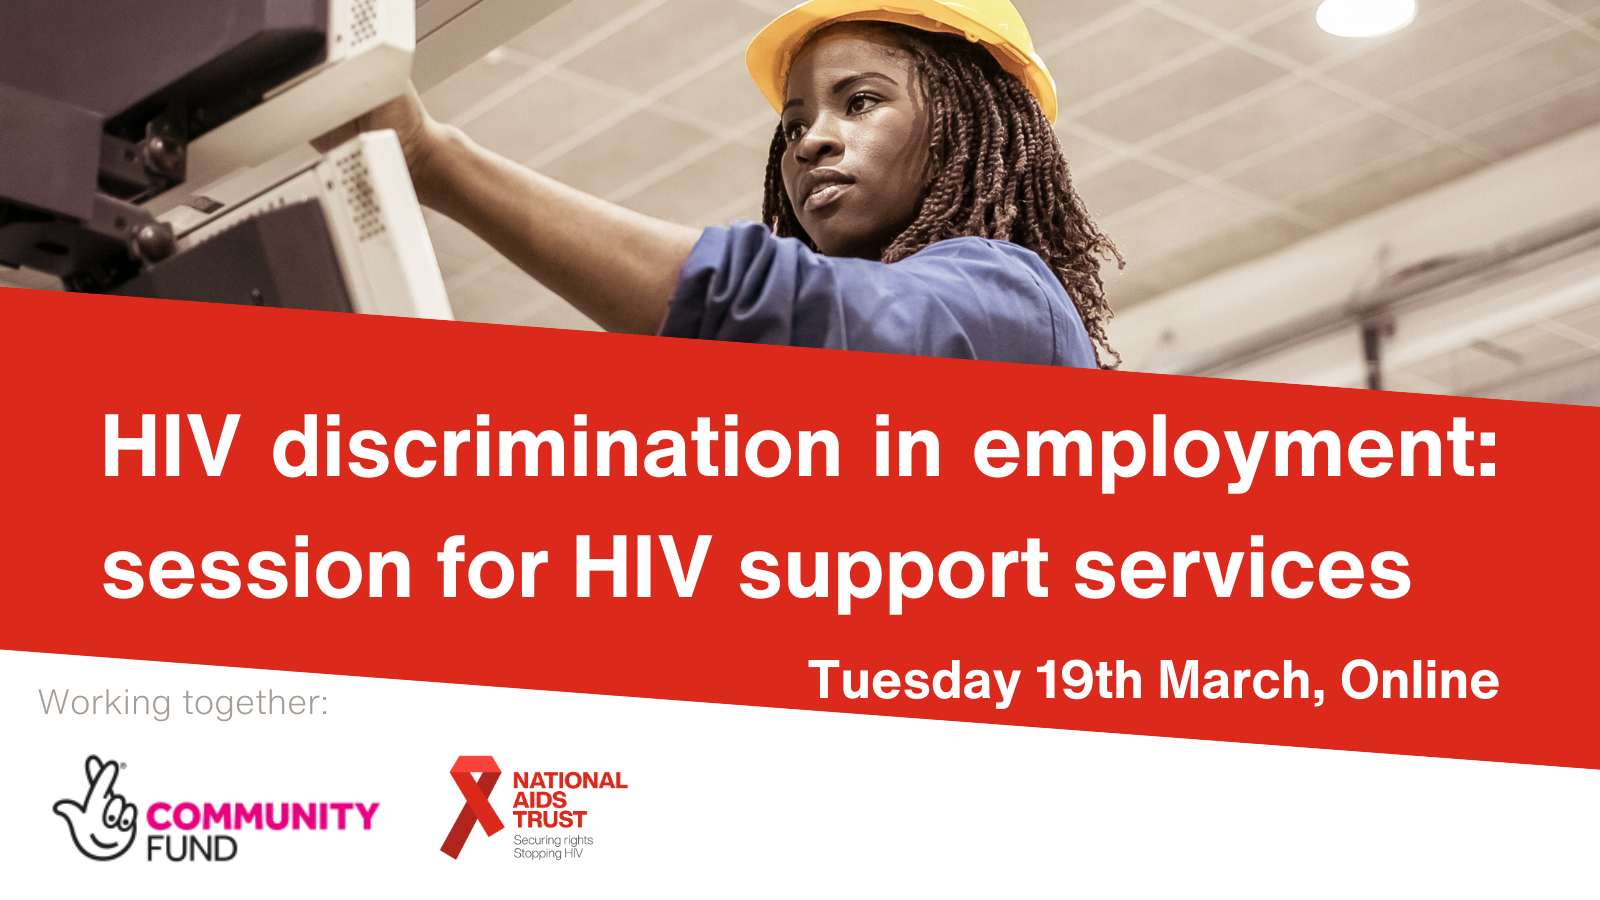 HIV discrimination in employment: session for HIV support services. Tuesday 19th March. Online. Community Fund. National AIDS Trust. 